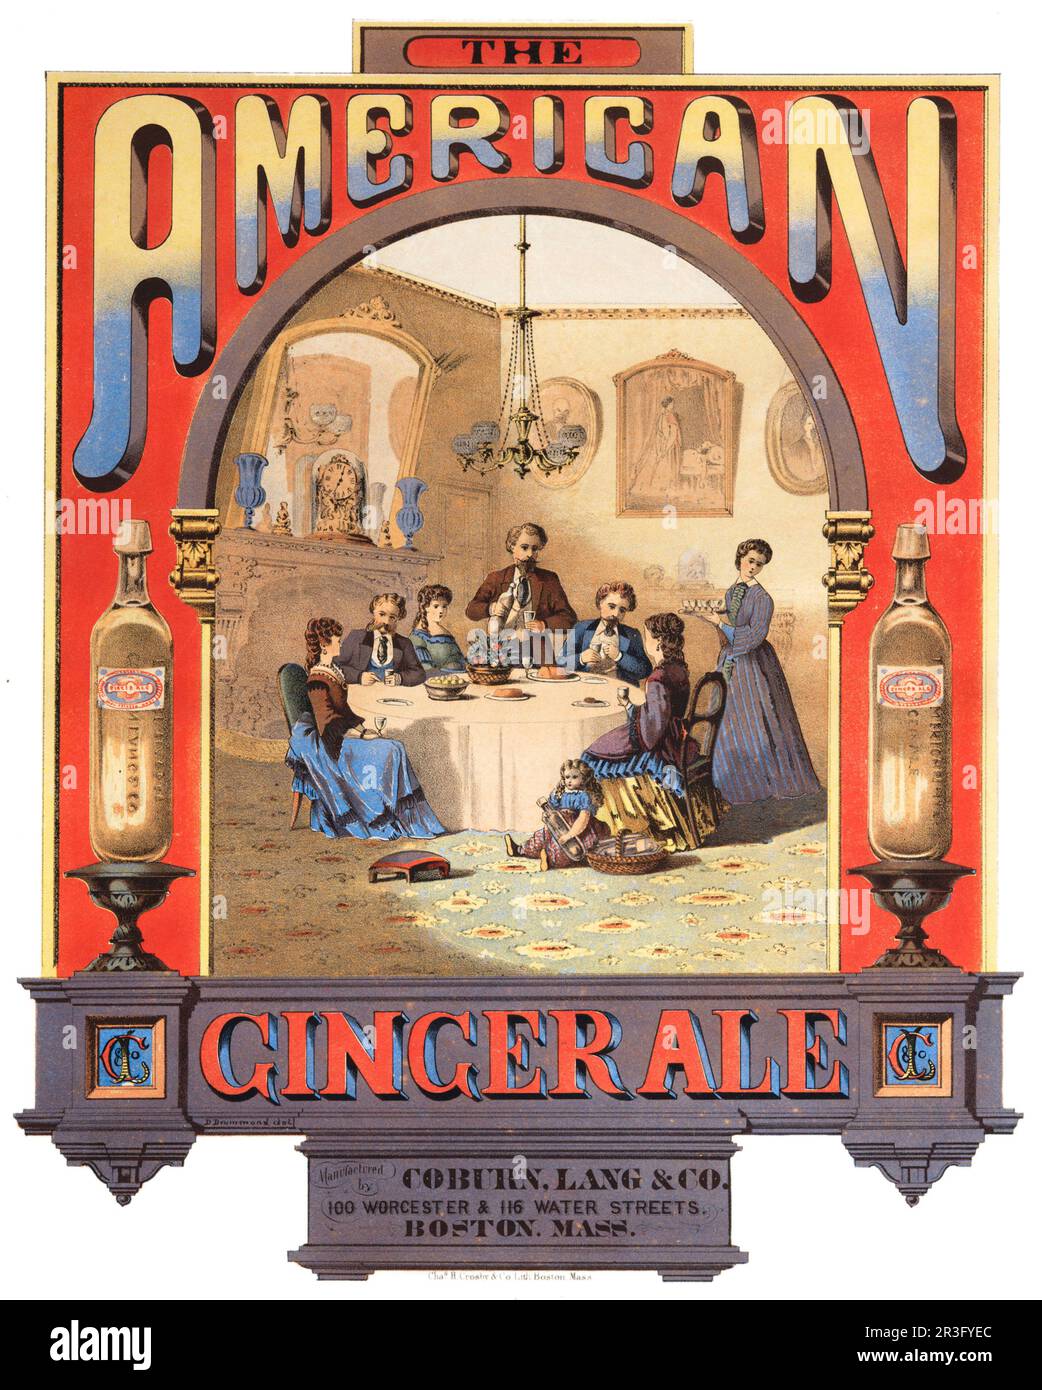 Vintage advertisement for Coburn, Lang & Company ginger ale. Stock Photo